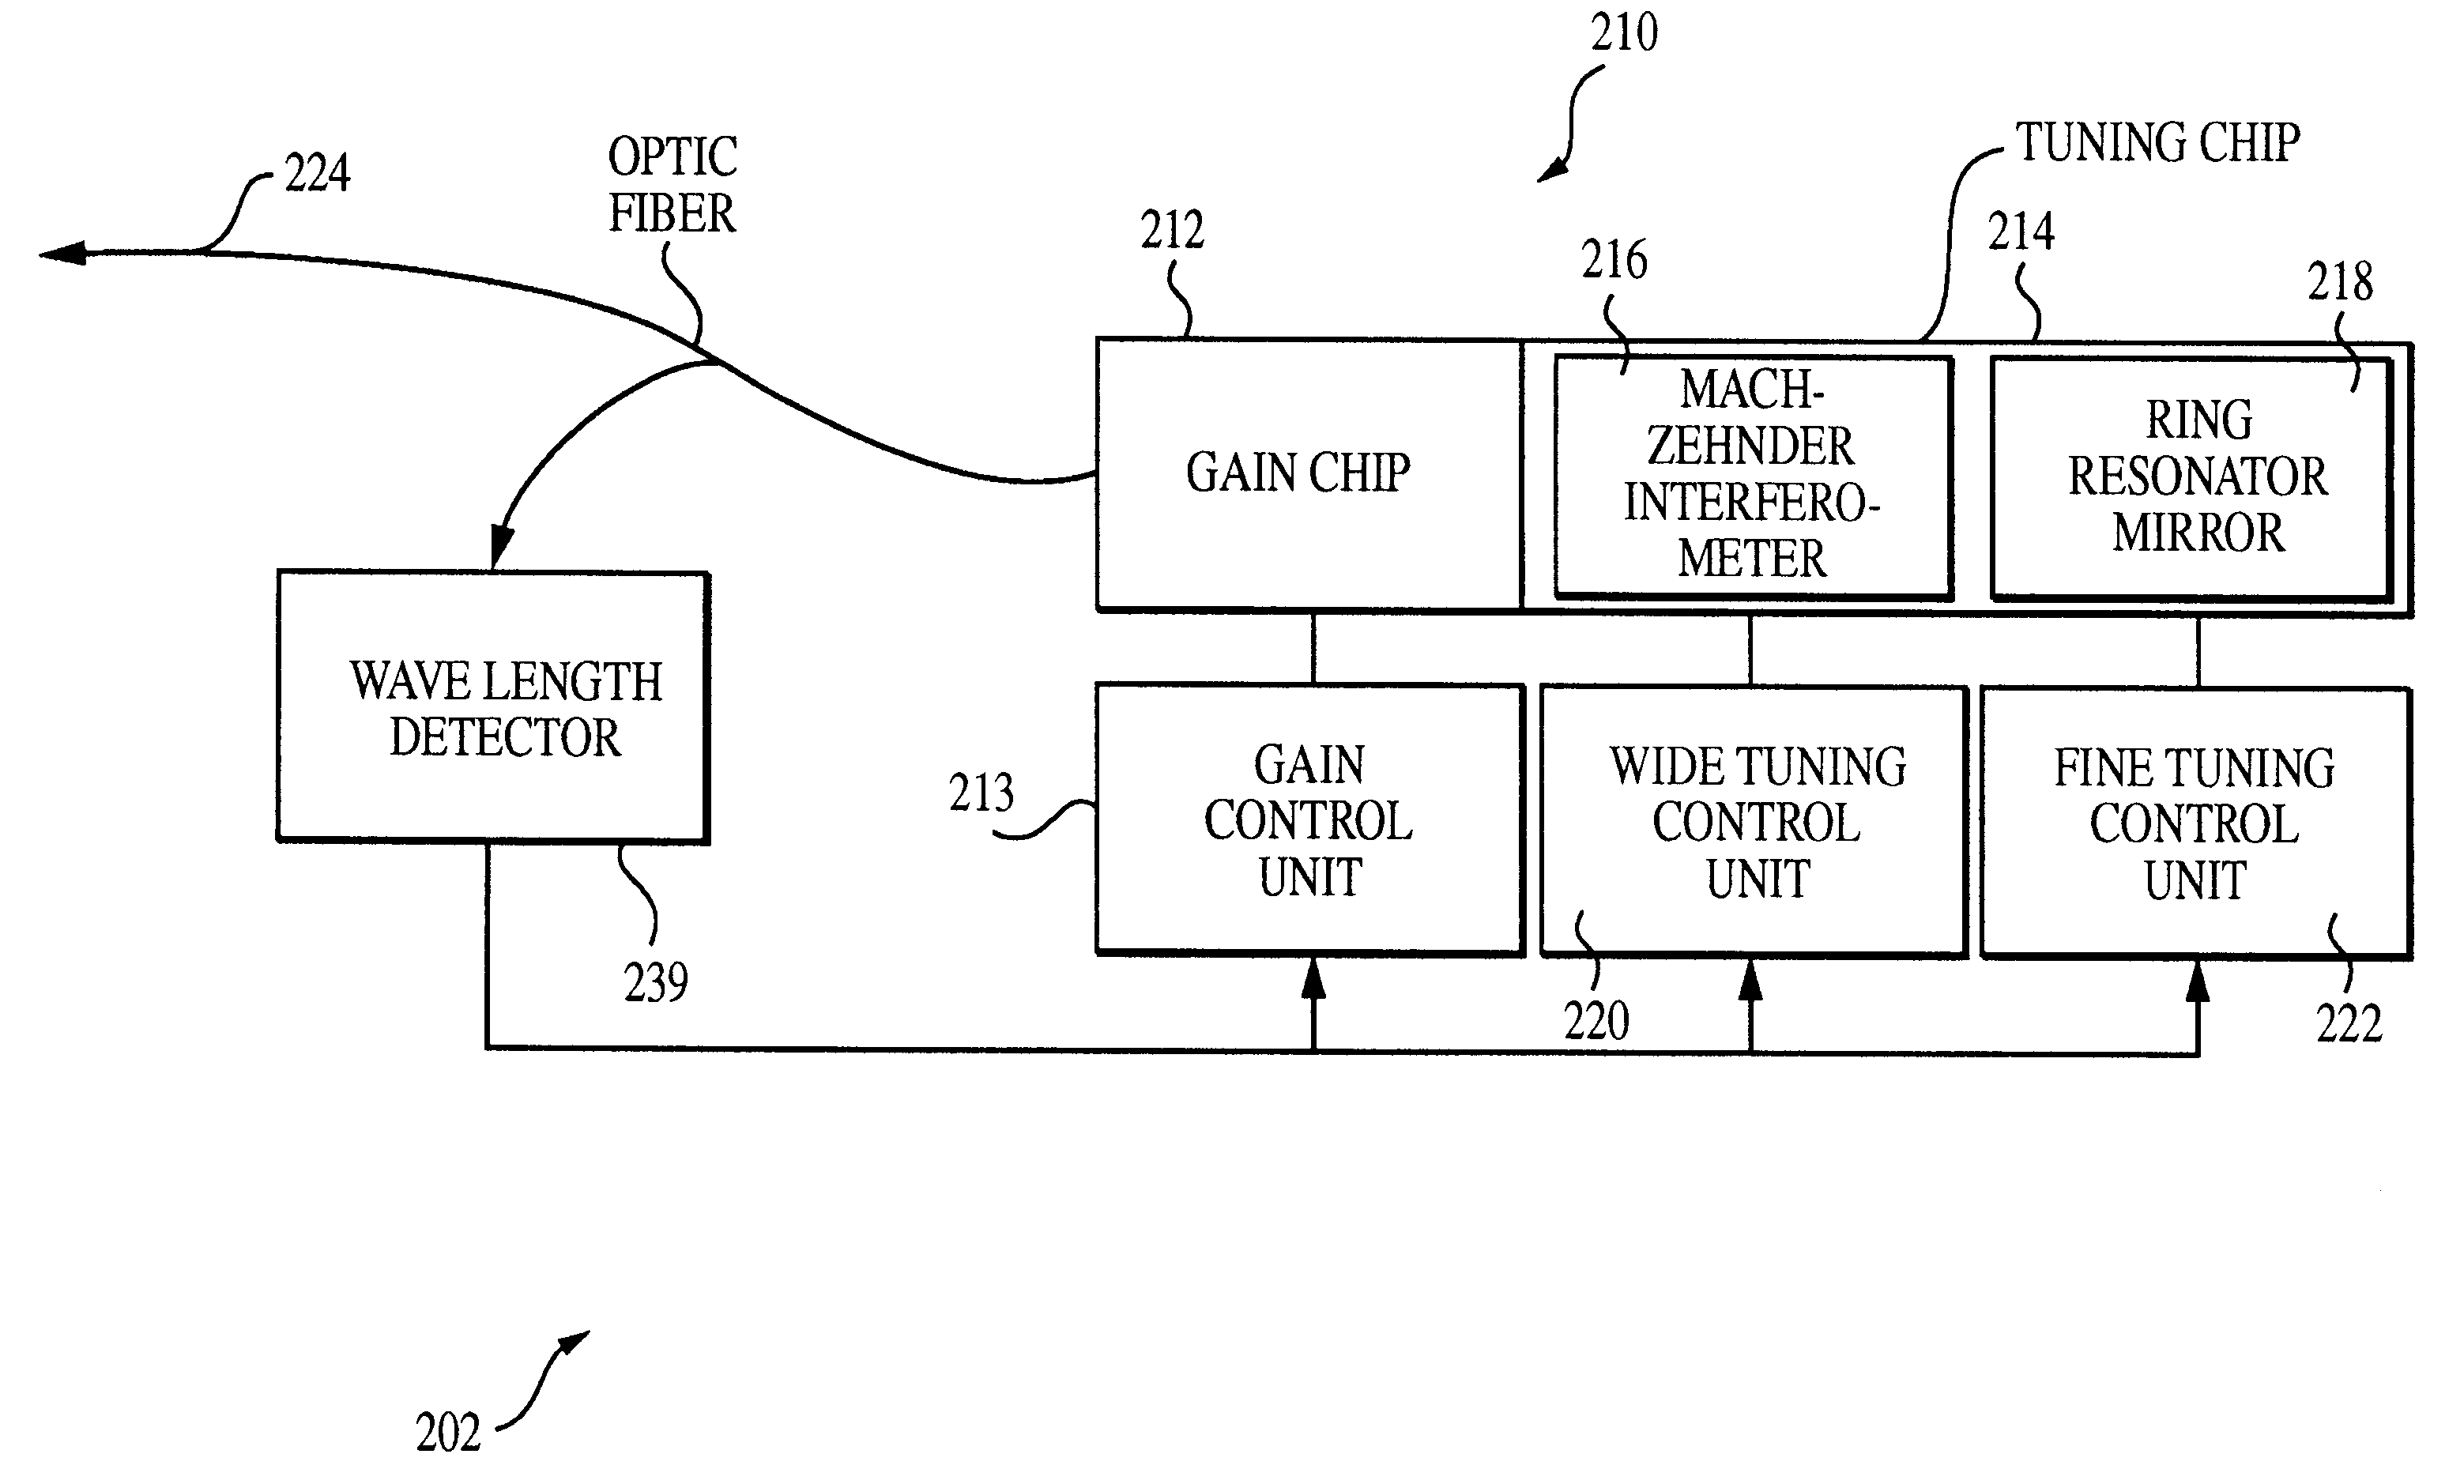 Tunable semiconductor laser having cavity with wavelength selective mirror and Mach-Zehnder interferometer